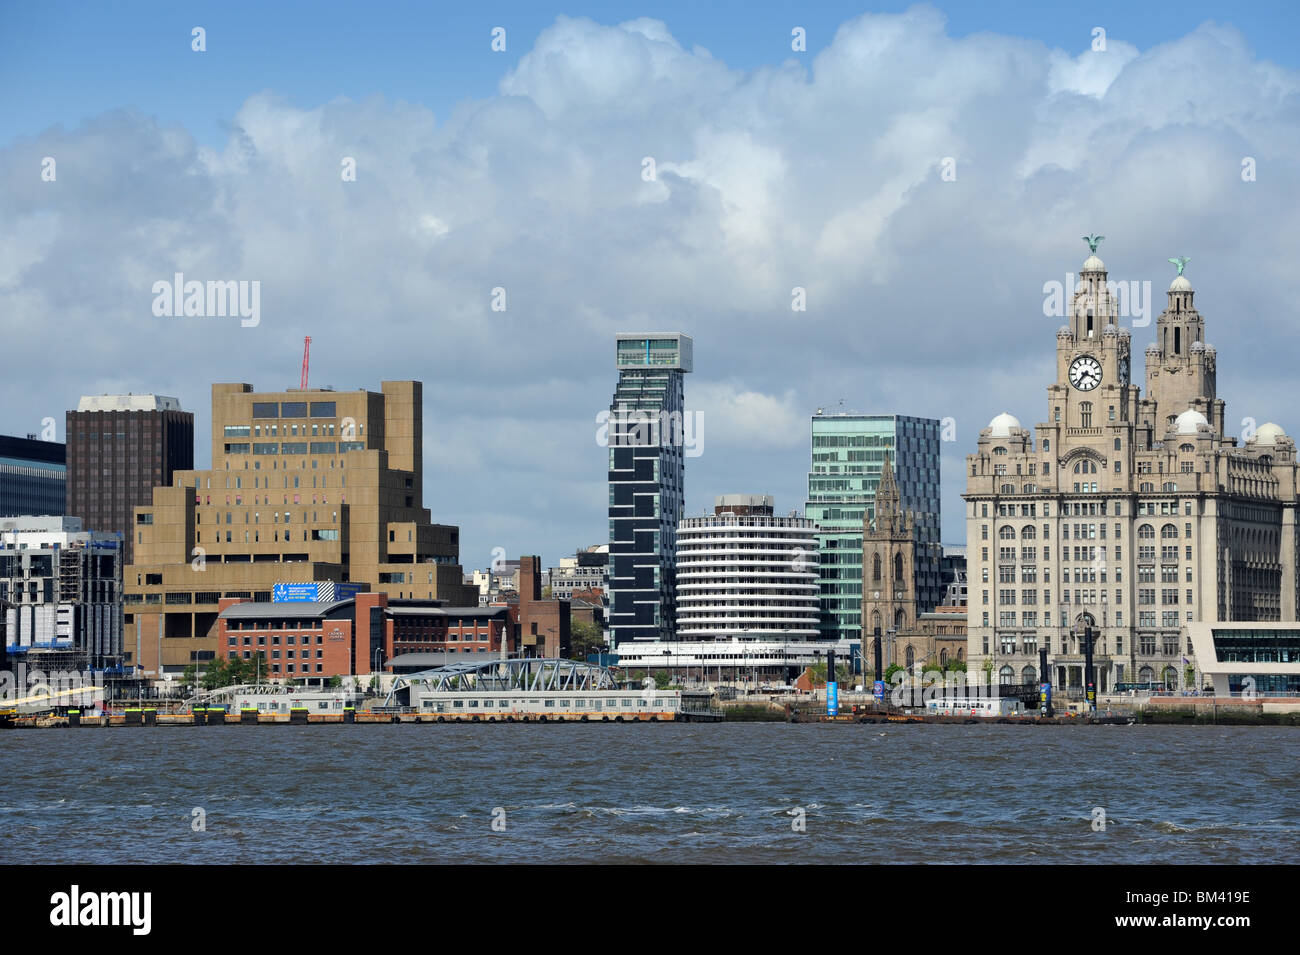 Modern and historic architecture in Liverpool seen from across the River Mersey Stock Photo